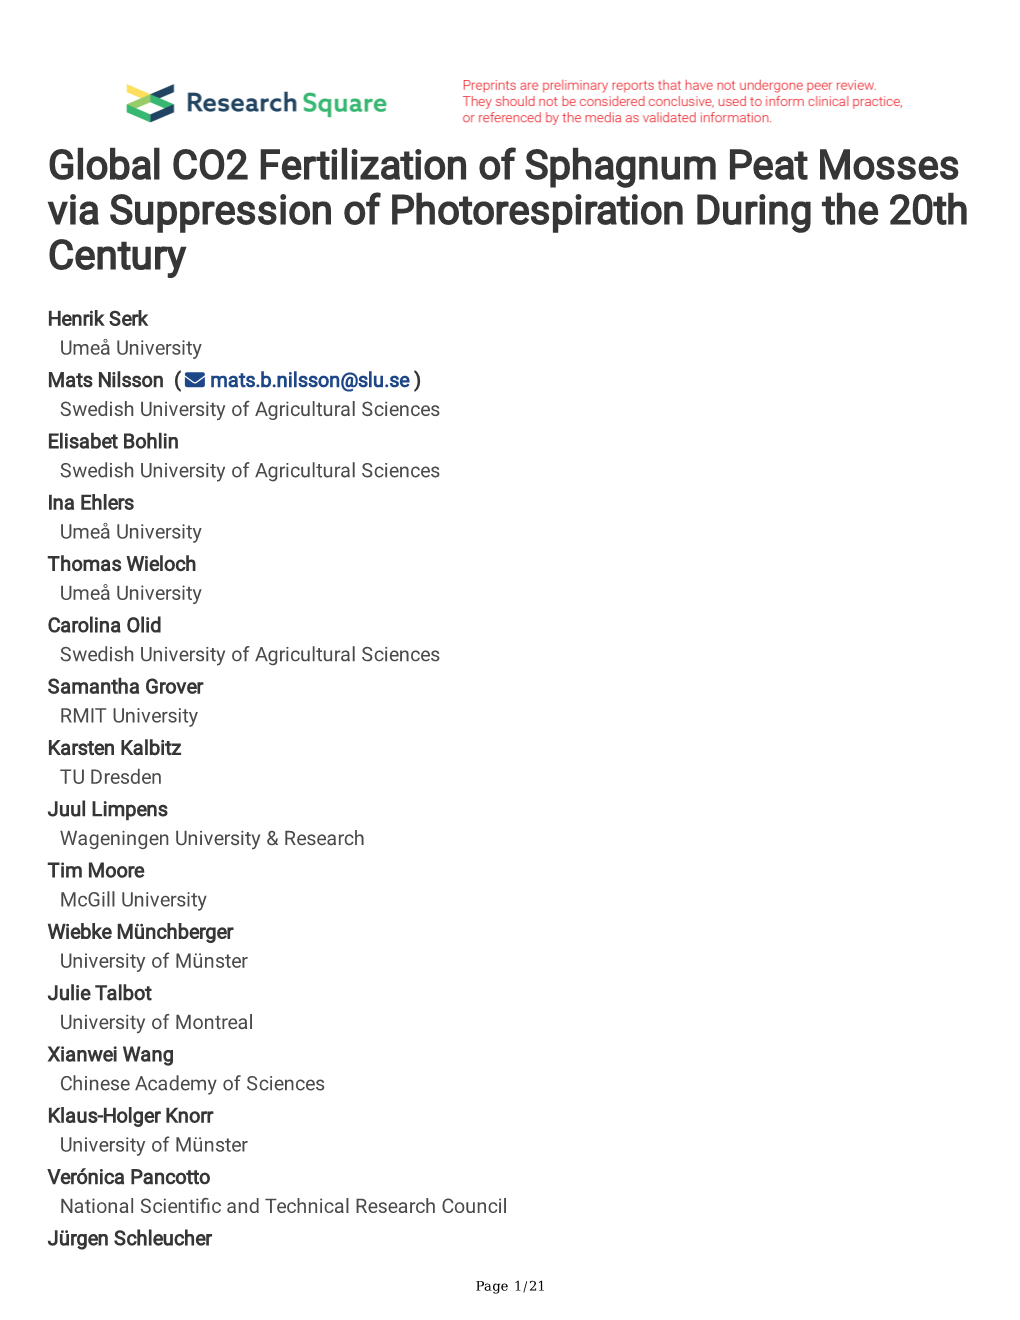 Global CO2 Fertilization of Sphagnum Peat Mosses Via Suppression of Photorespiration During the 20Th Century